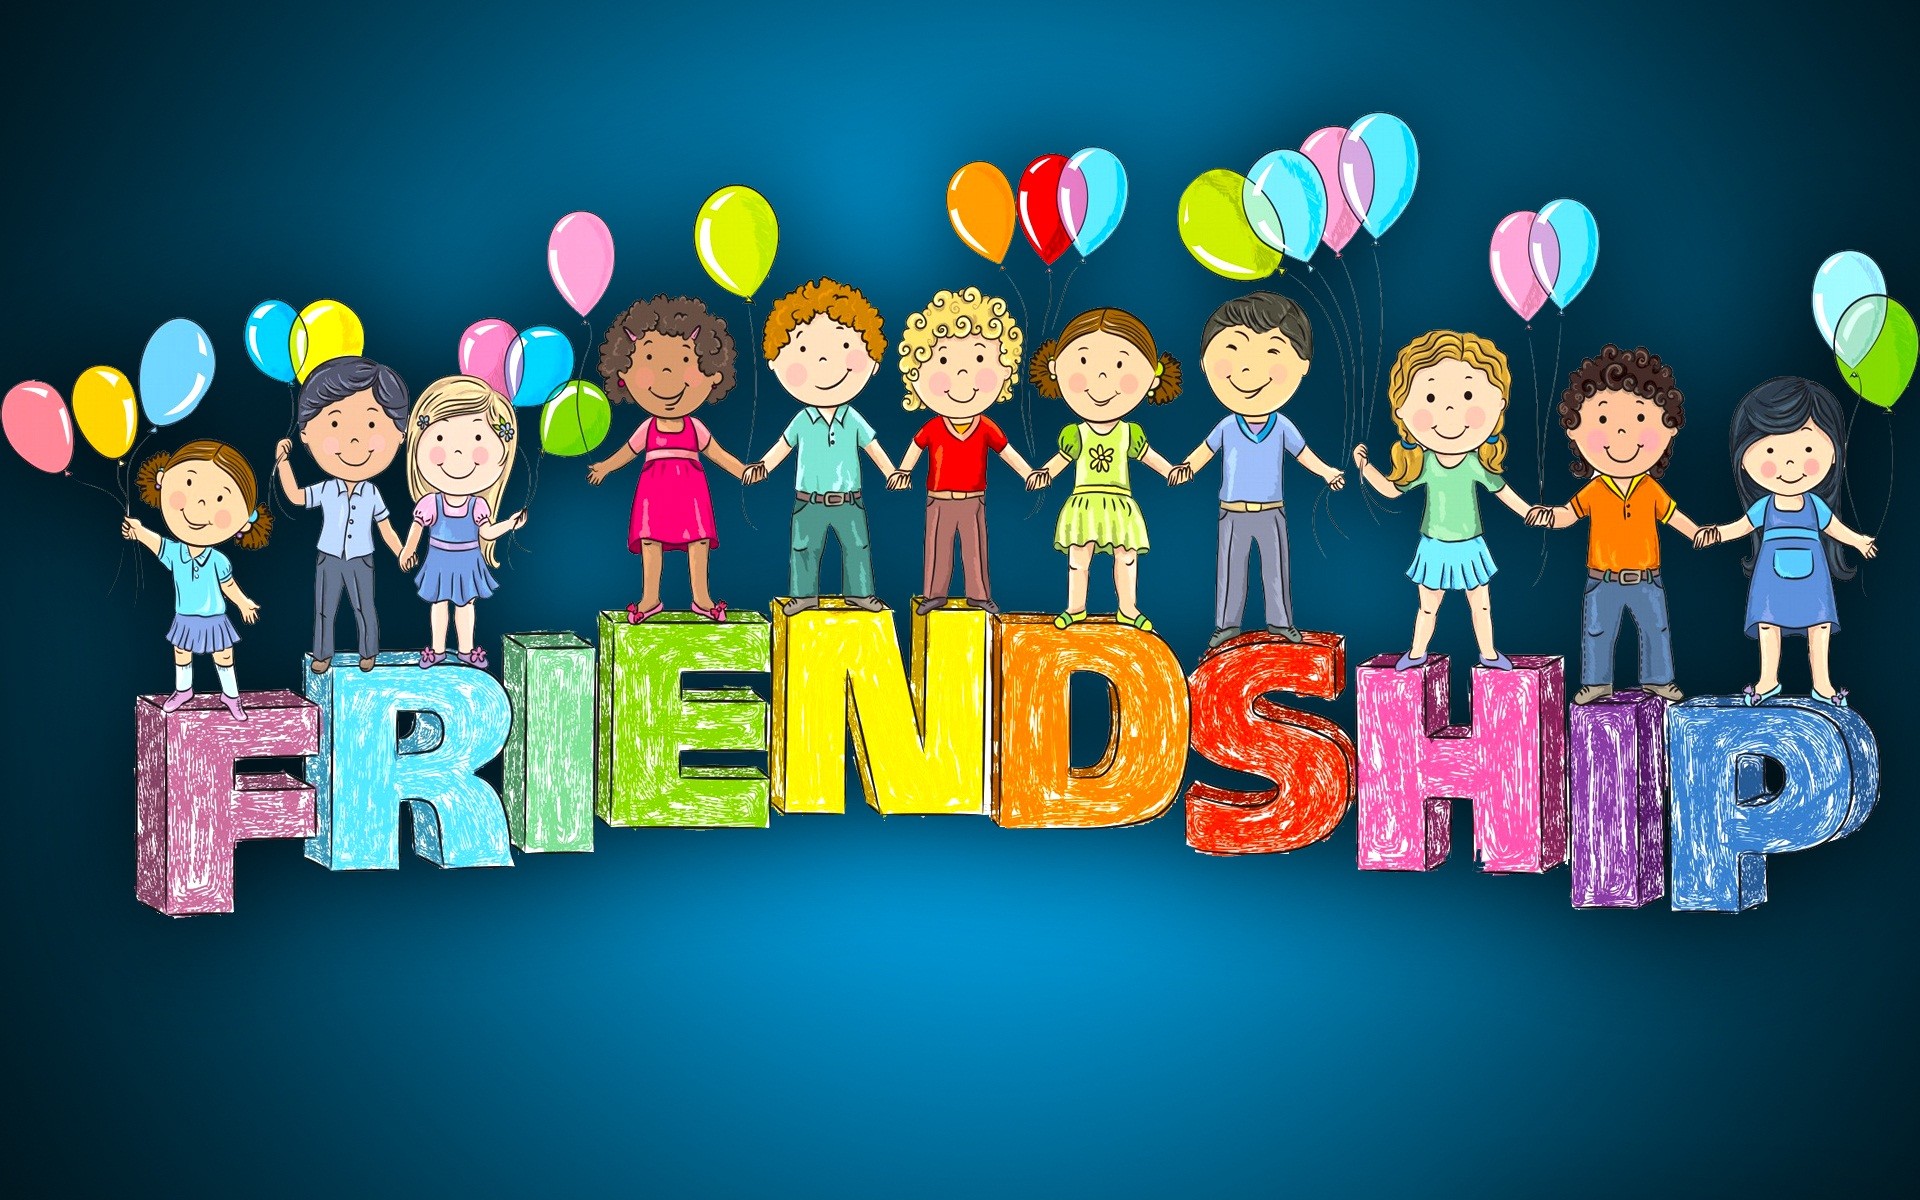 Wallpaper Friendship Images Wallpapers